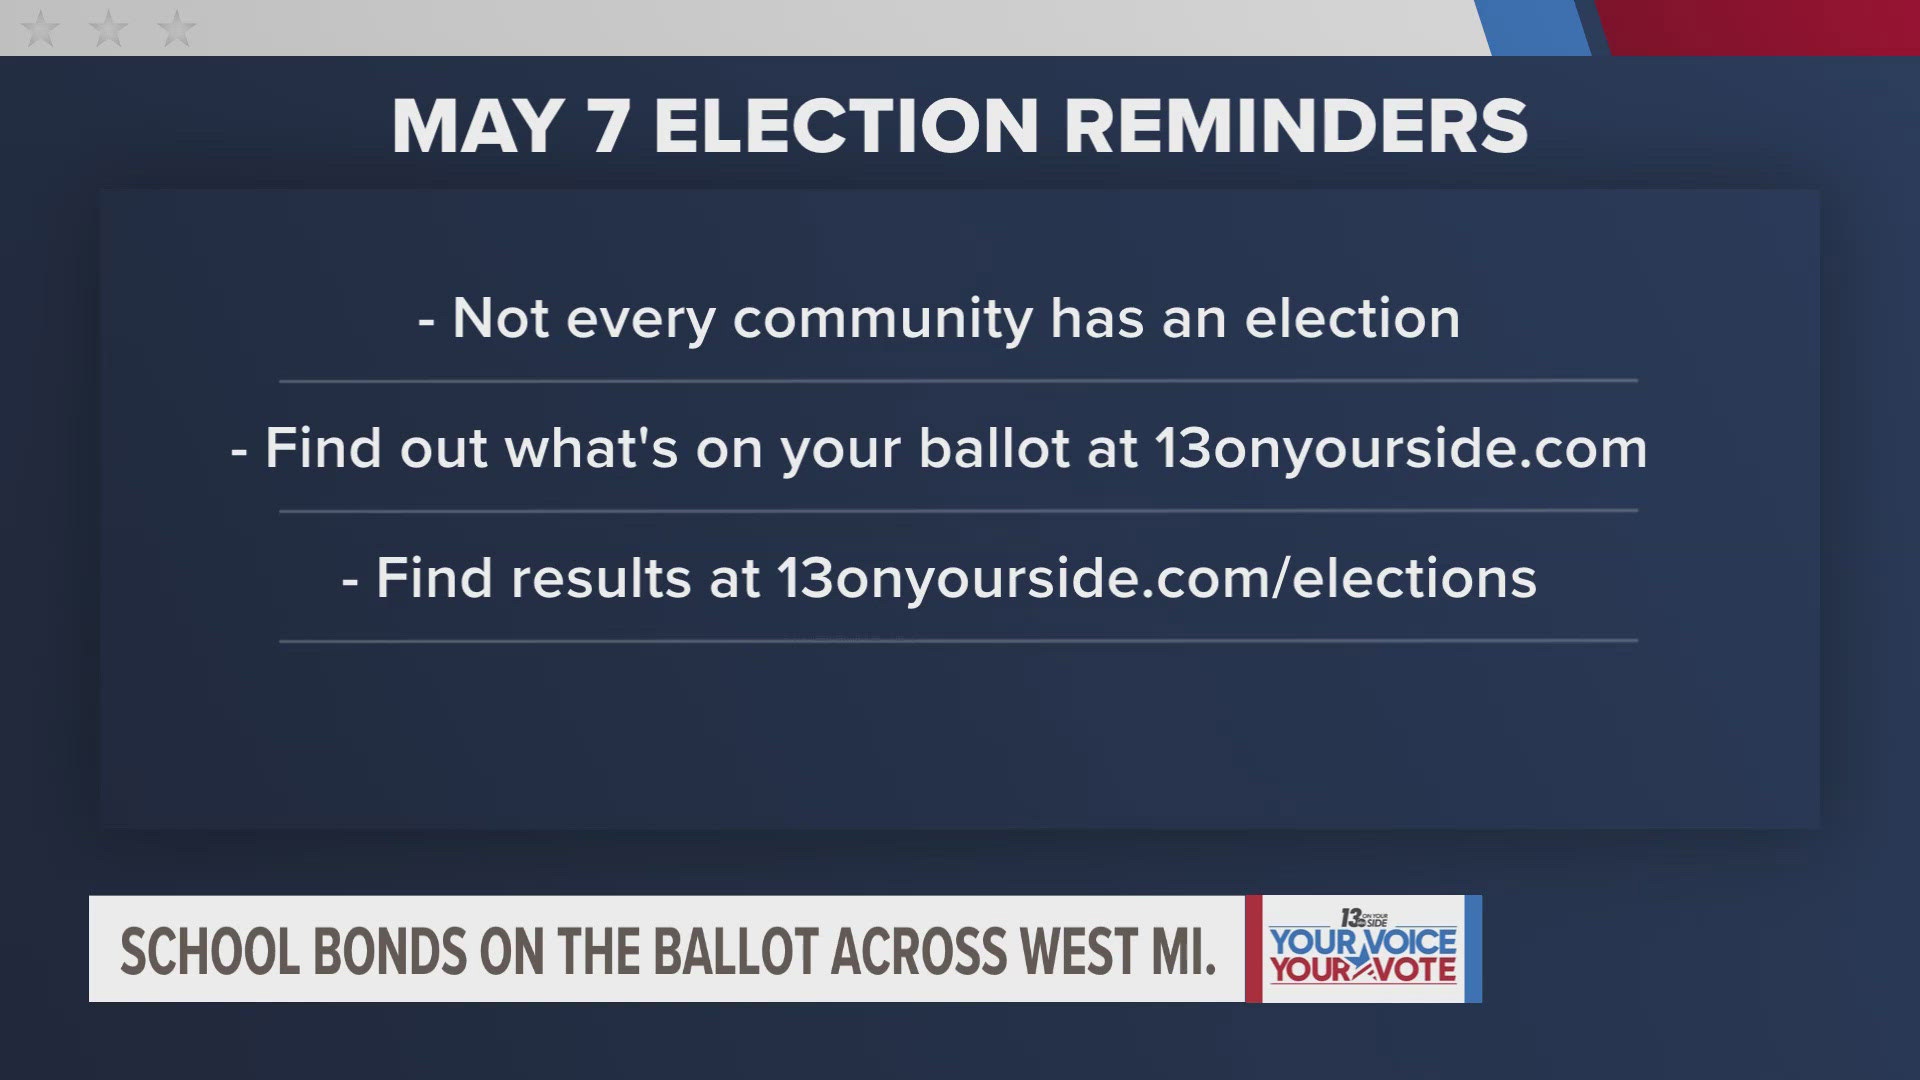 Voters throughout West Michigan will consider bond proposals, school millages, and a handful of local races.